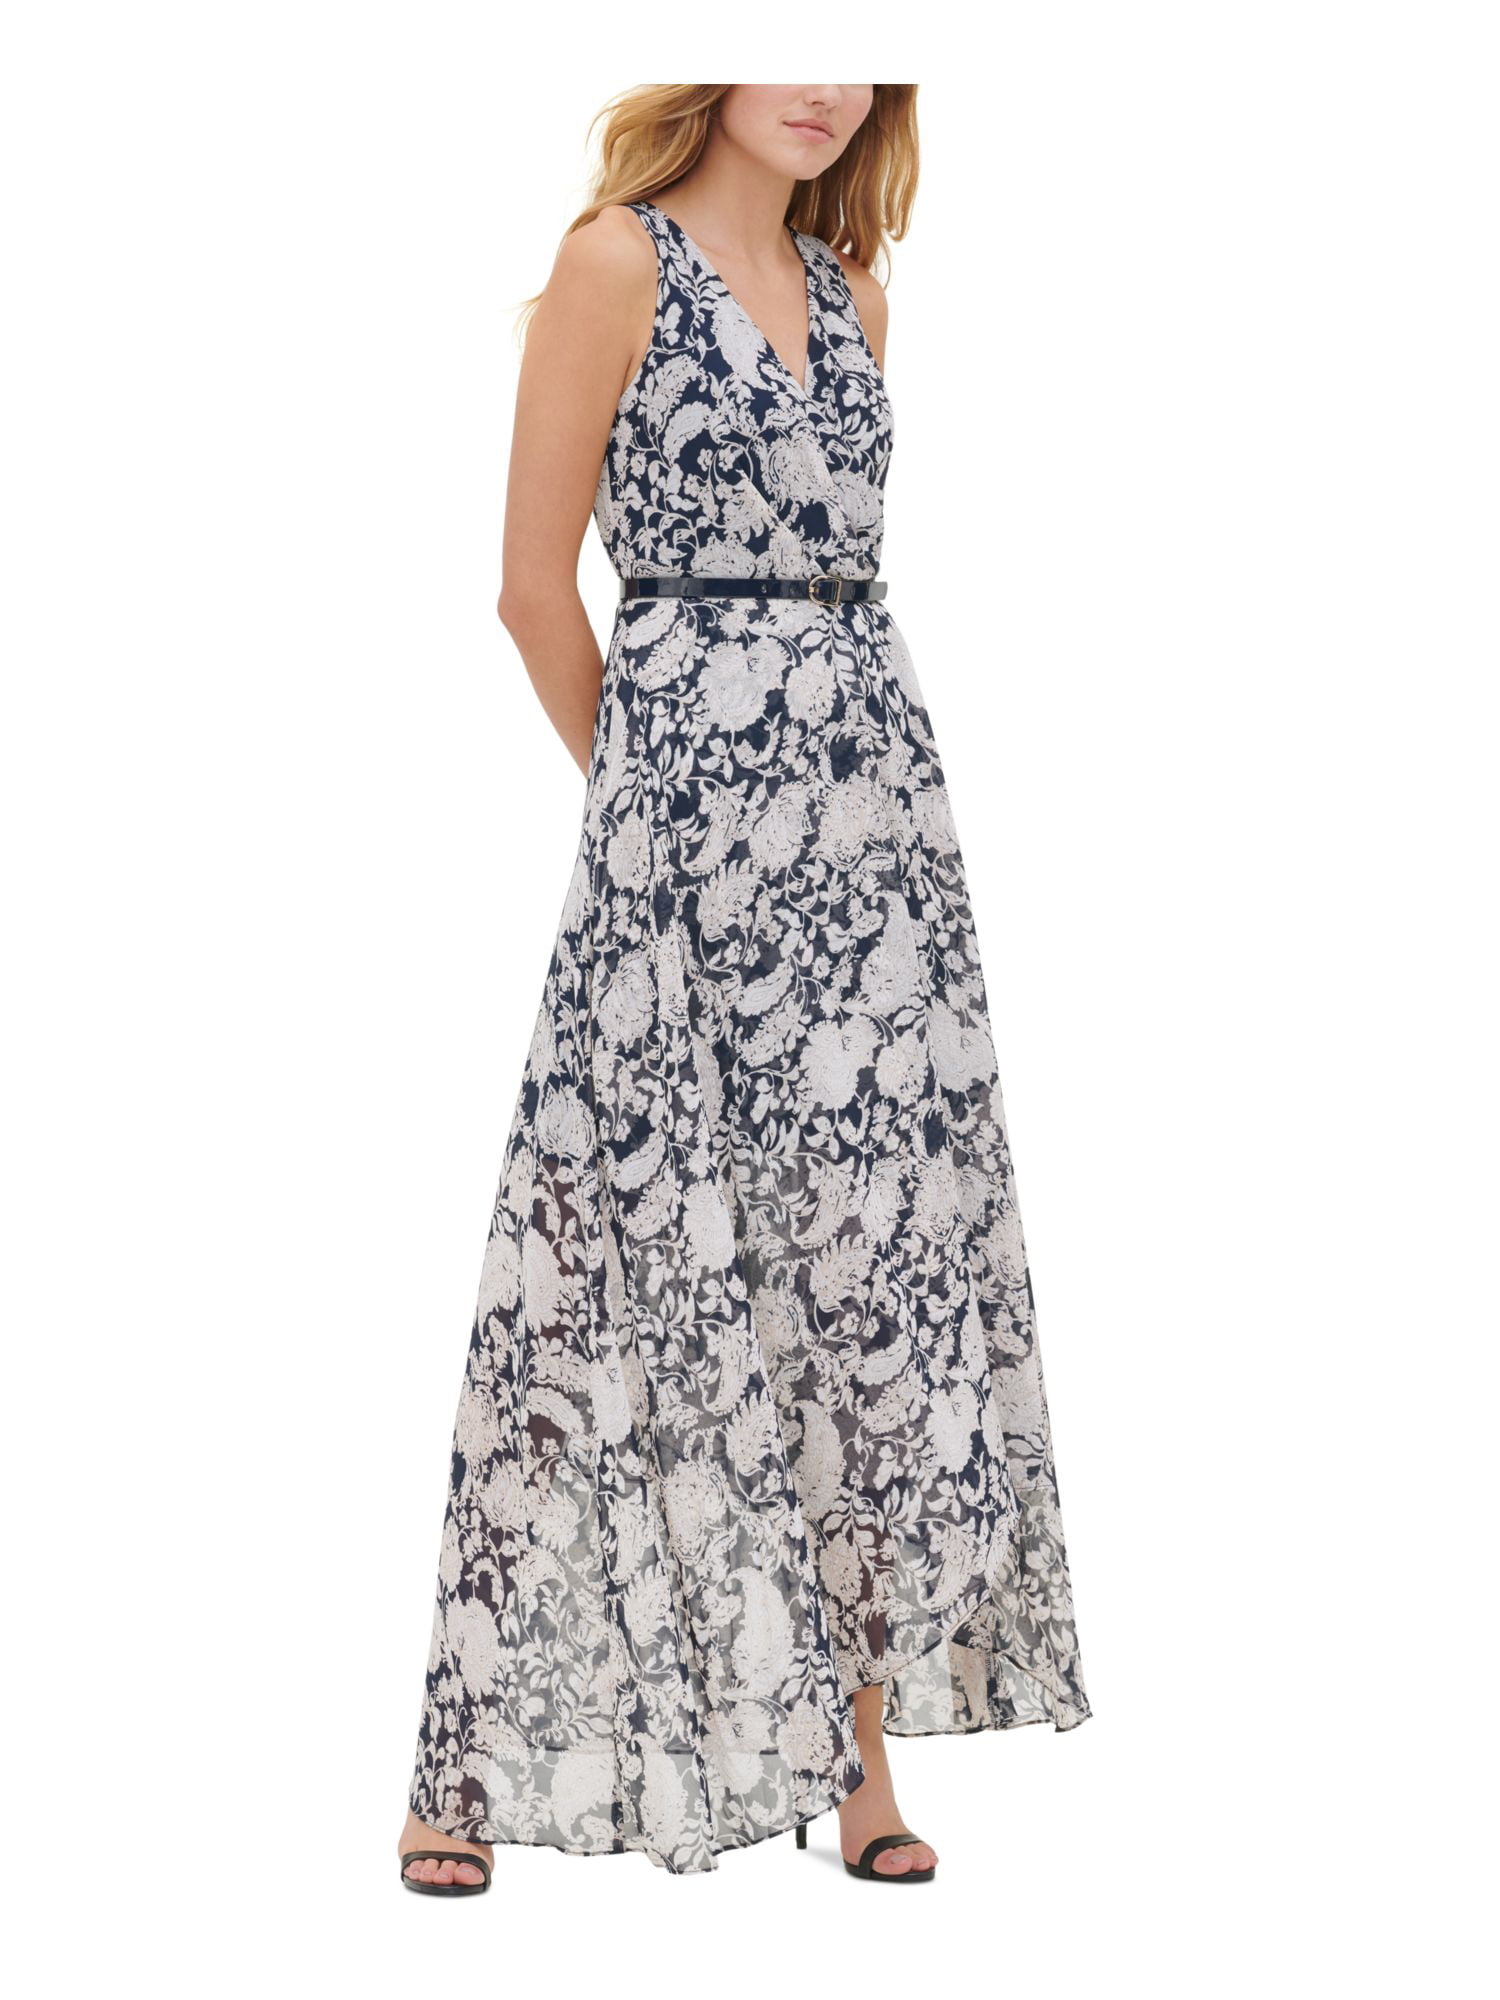 TOMMY HILFIGER Womens Navy Belted 6 Surplice Neckline Lined Floral Dress Maxi Evening Zippered Sleeveless